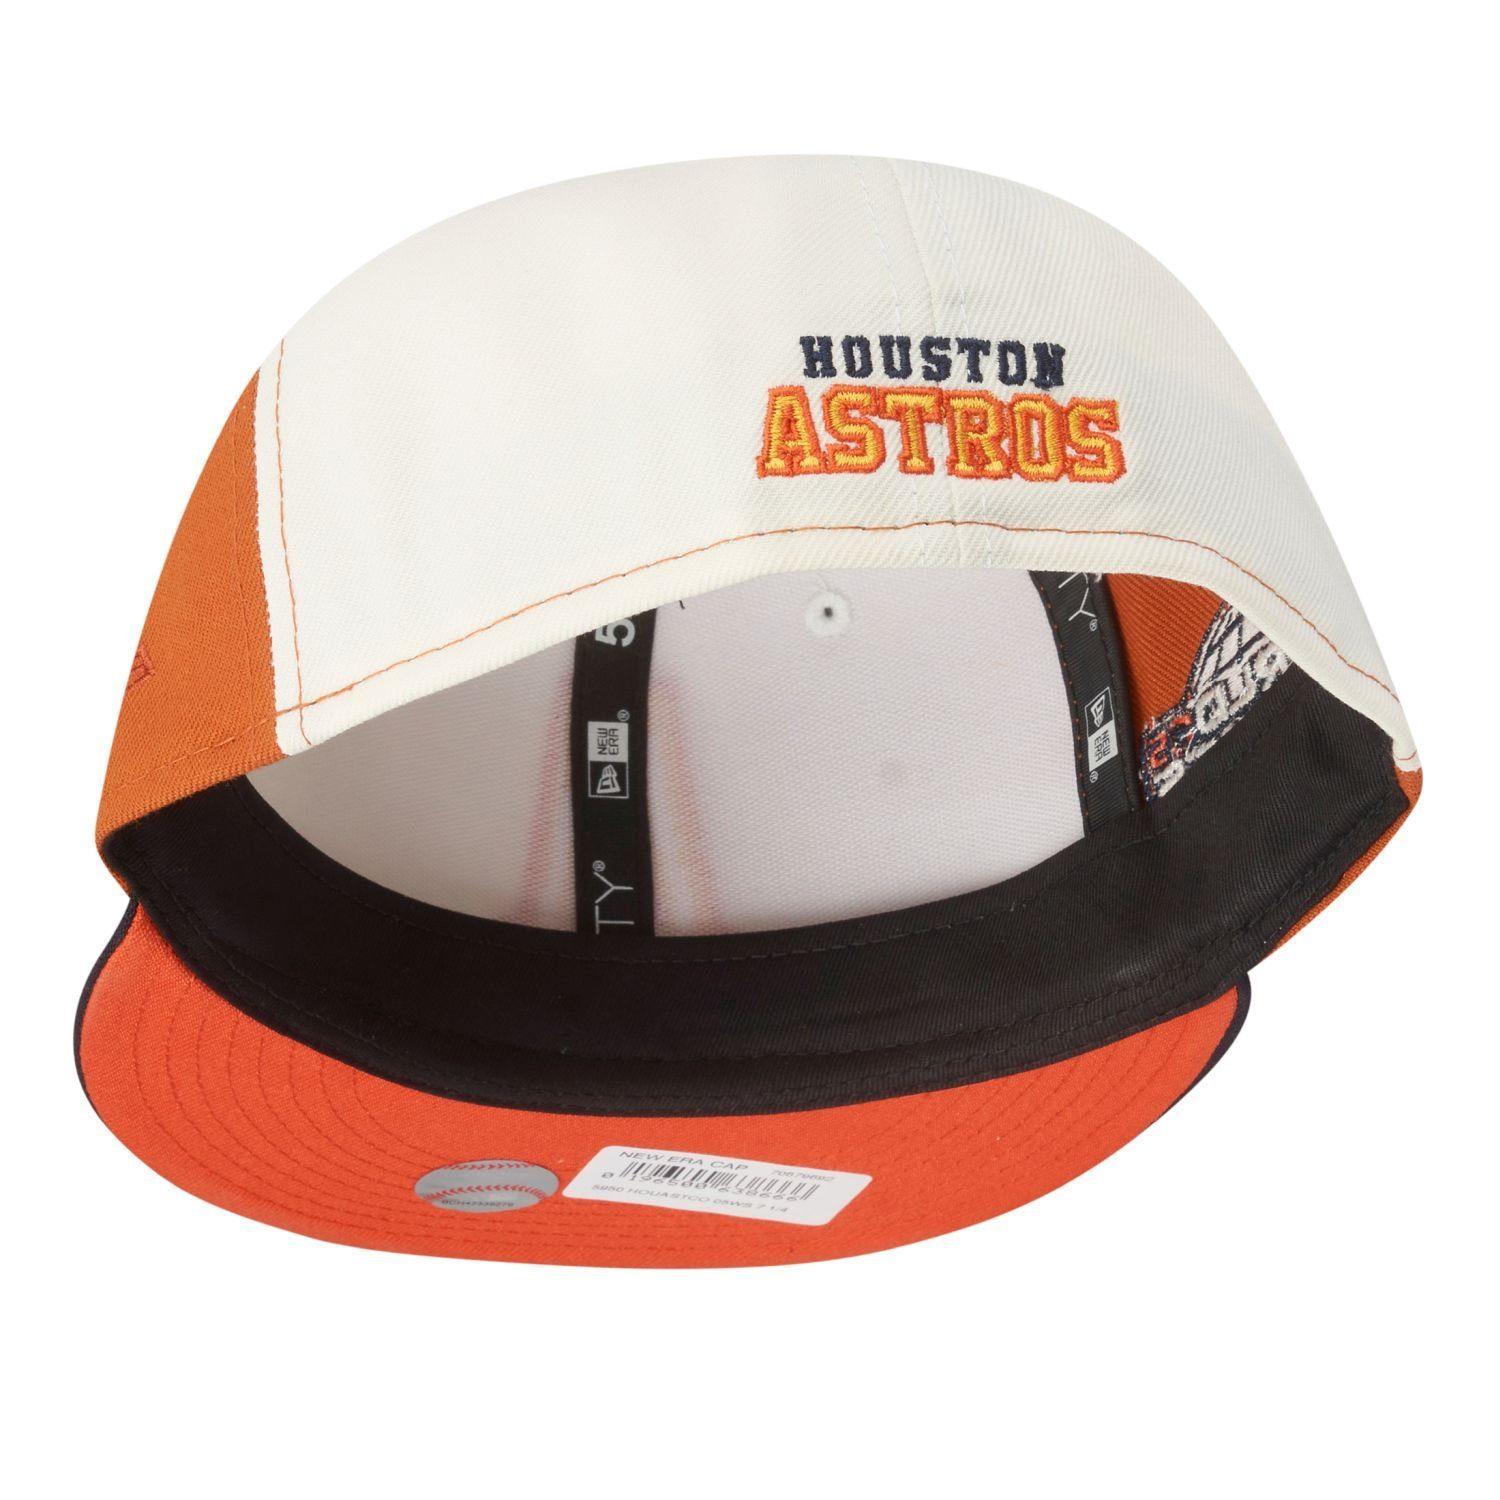 New Astros LIGATURE Houston 59Fifty Cap Fitted chrome Era